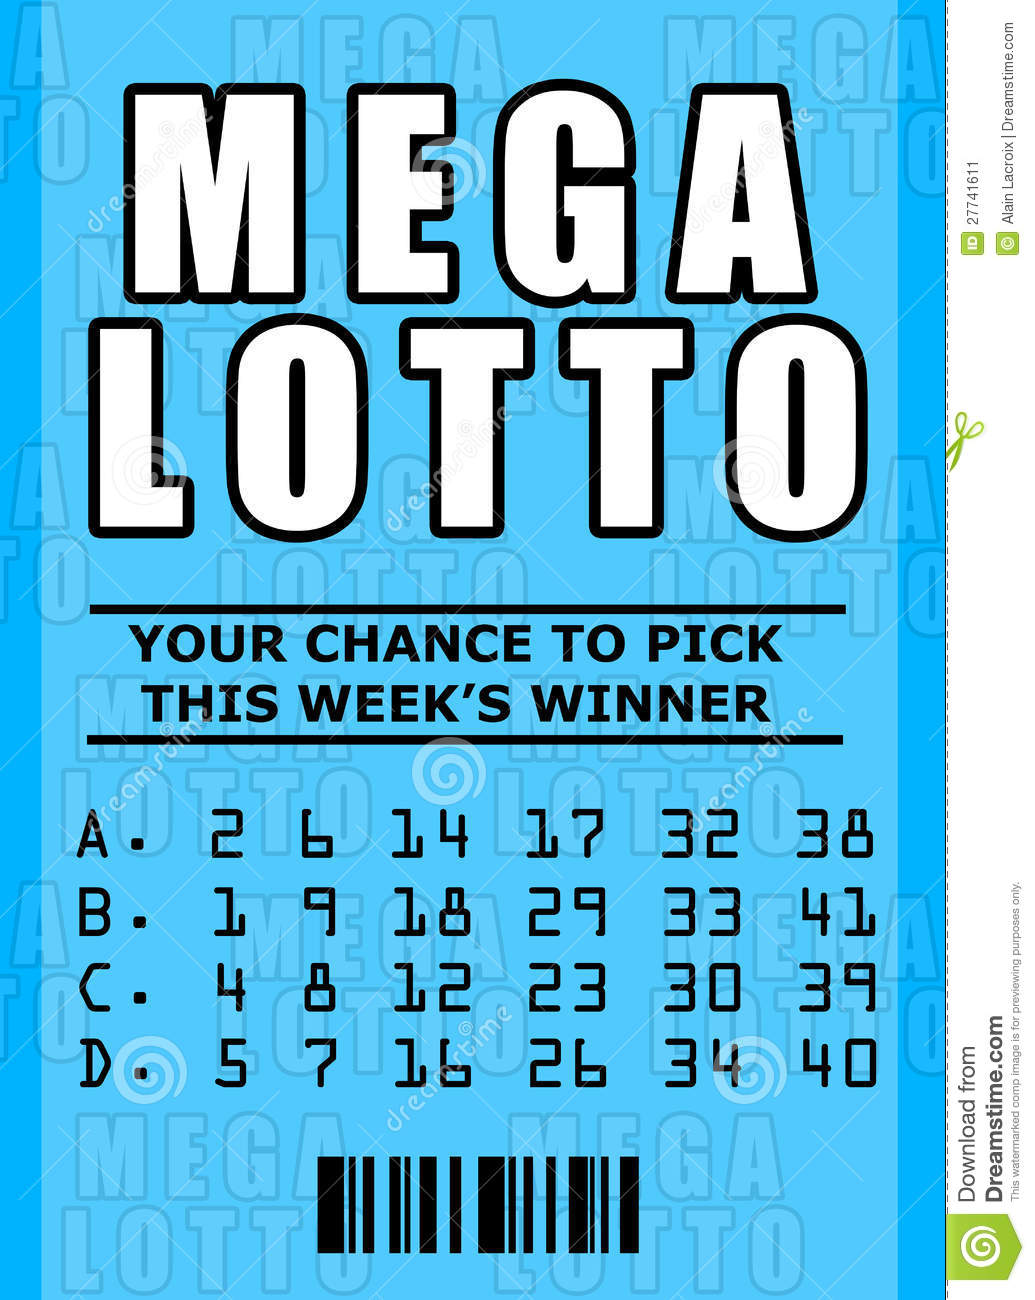 Lottery Ticket Stock Image   Image  27741611